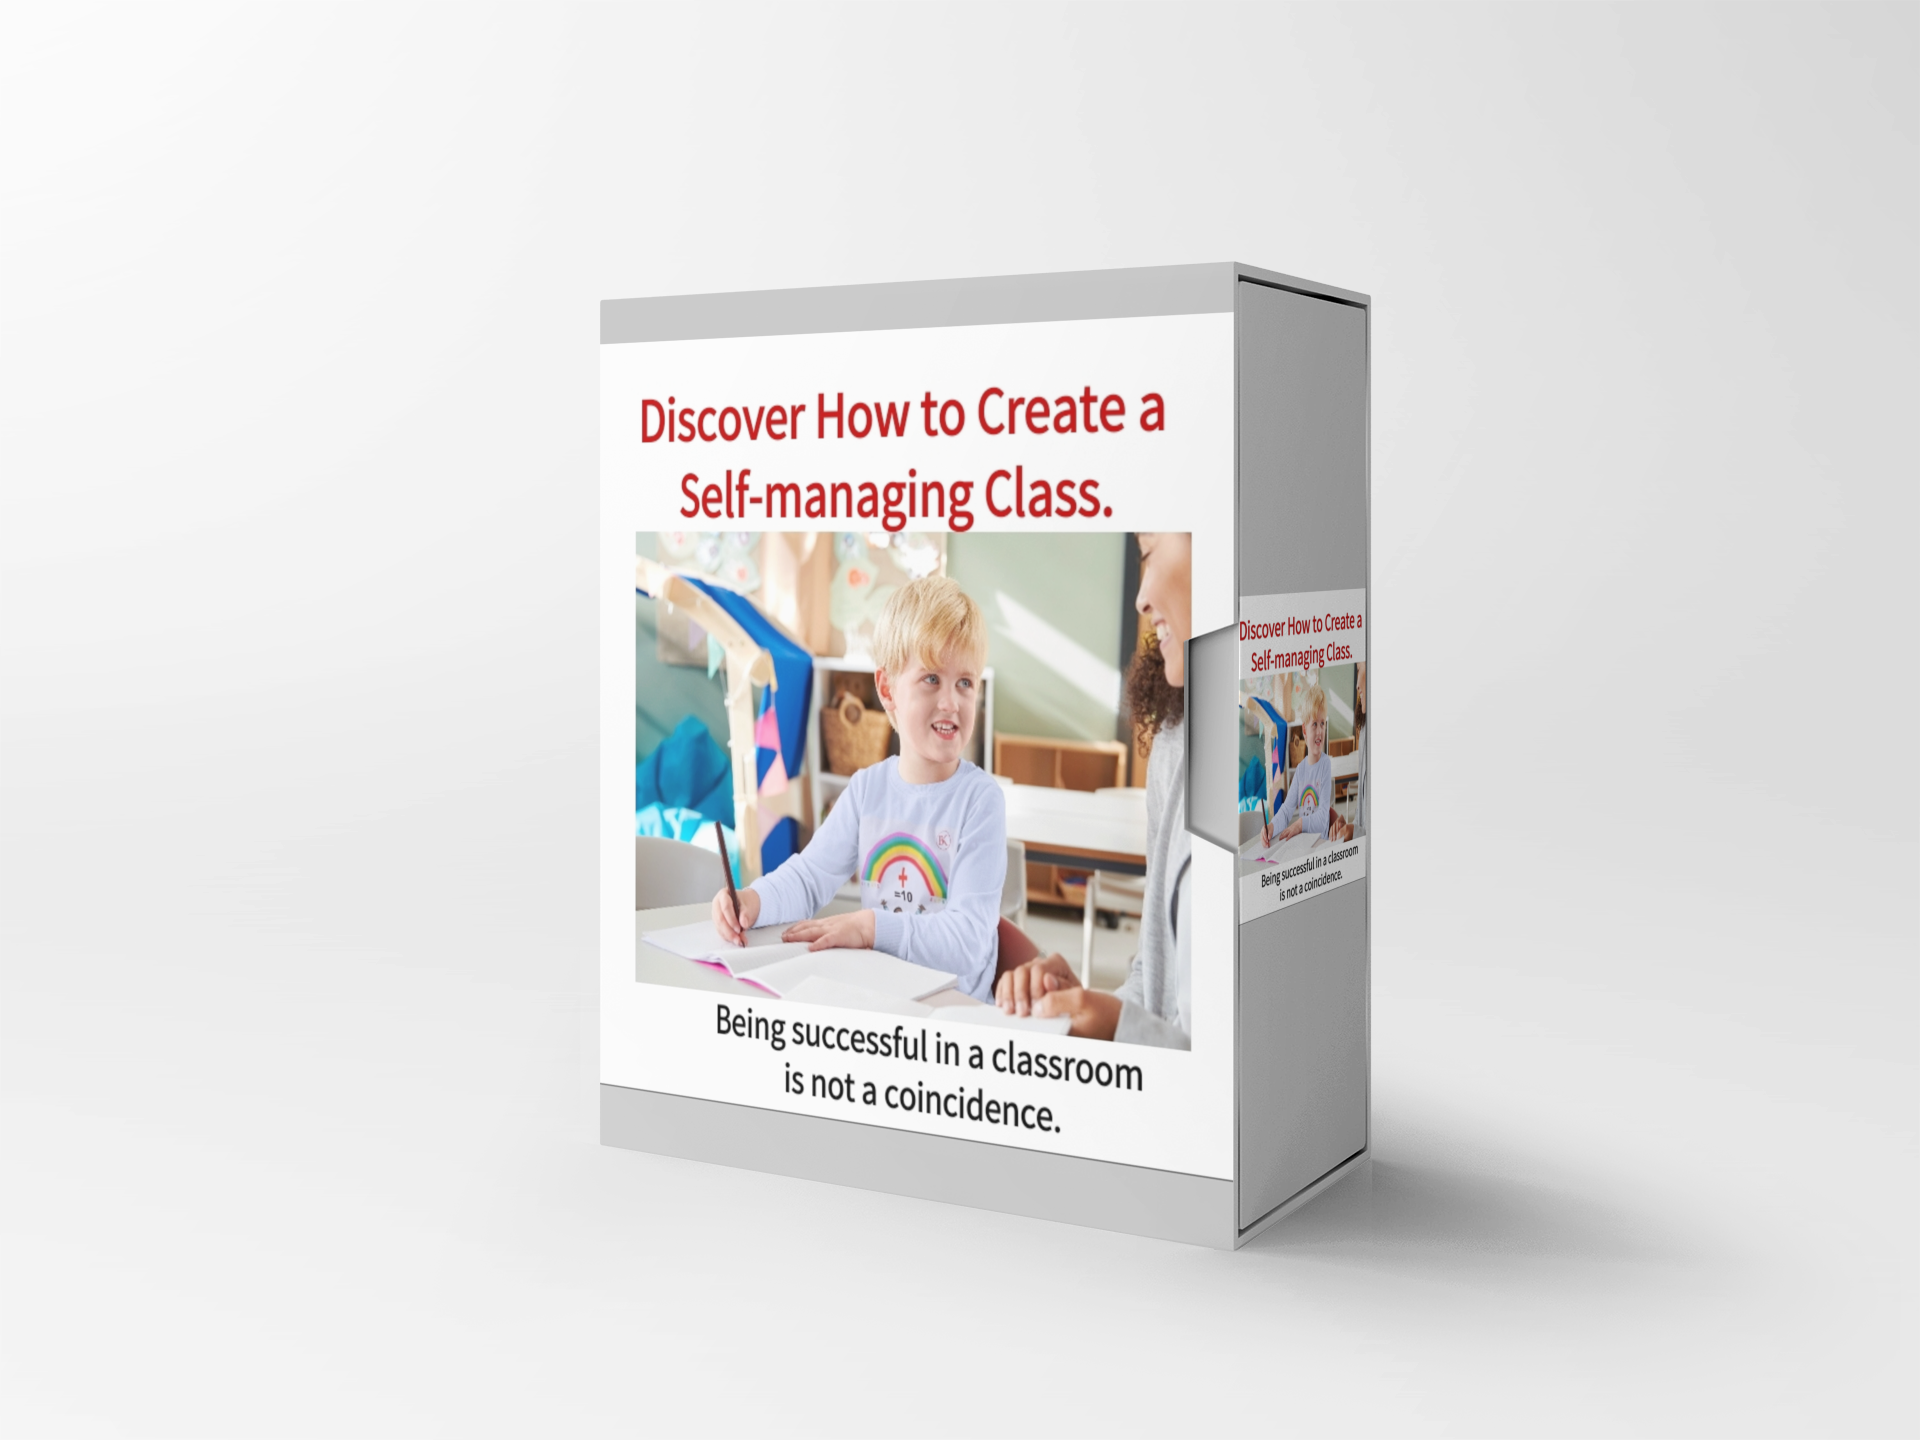 DISCOVER HOW TO CREATE A SELF-MANAGING CLASS ENGLISH VERSION